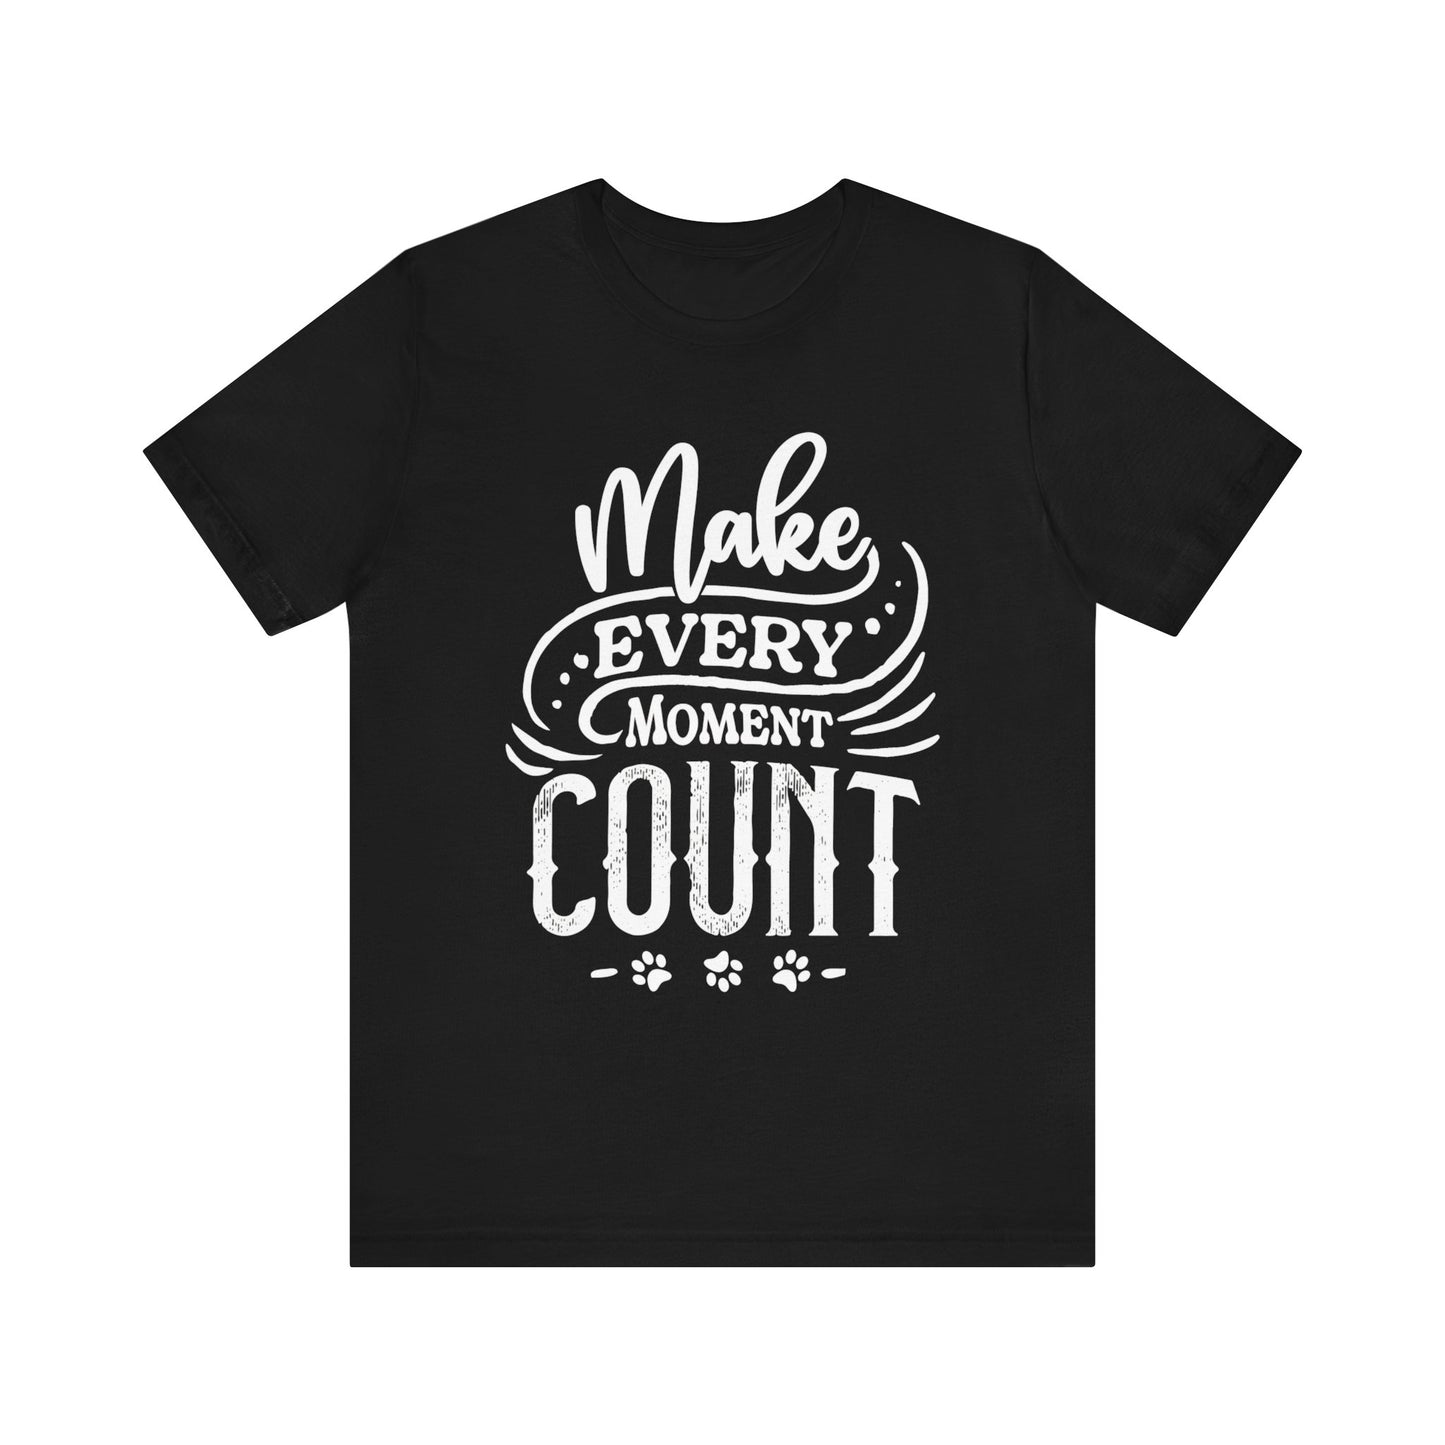 Set on a white backdrop, a black Dogs Pure Love unisex tee displays the slogan 'Make Every Moment Count.'